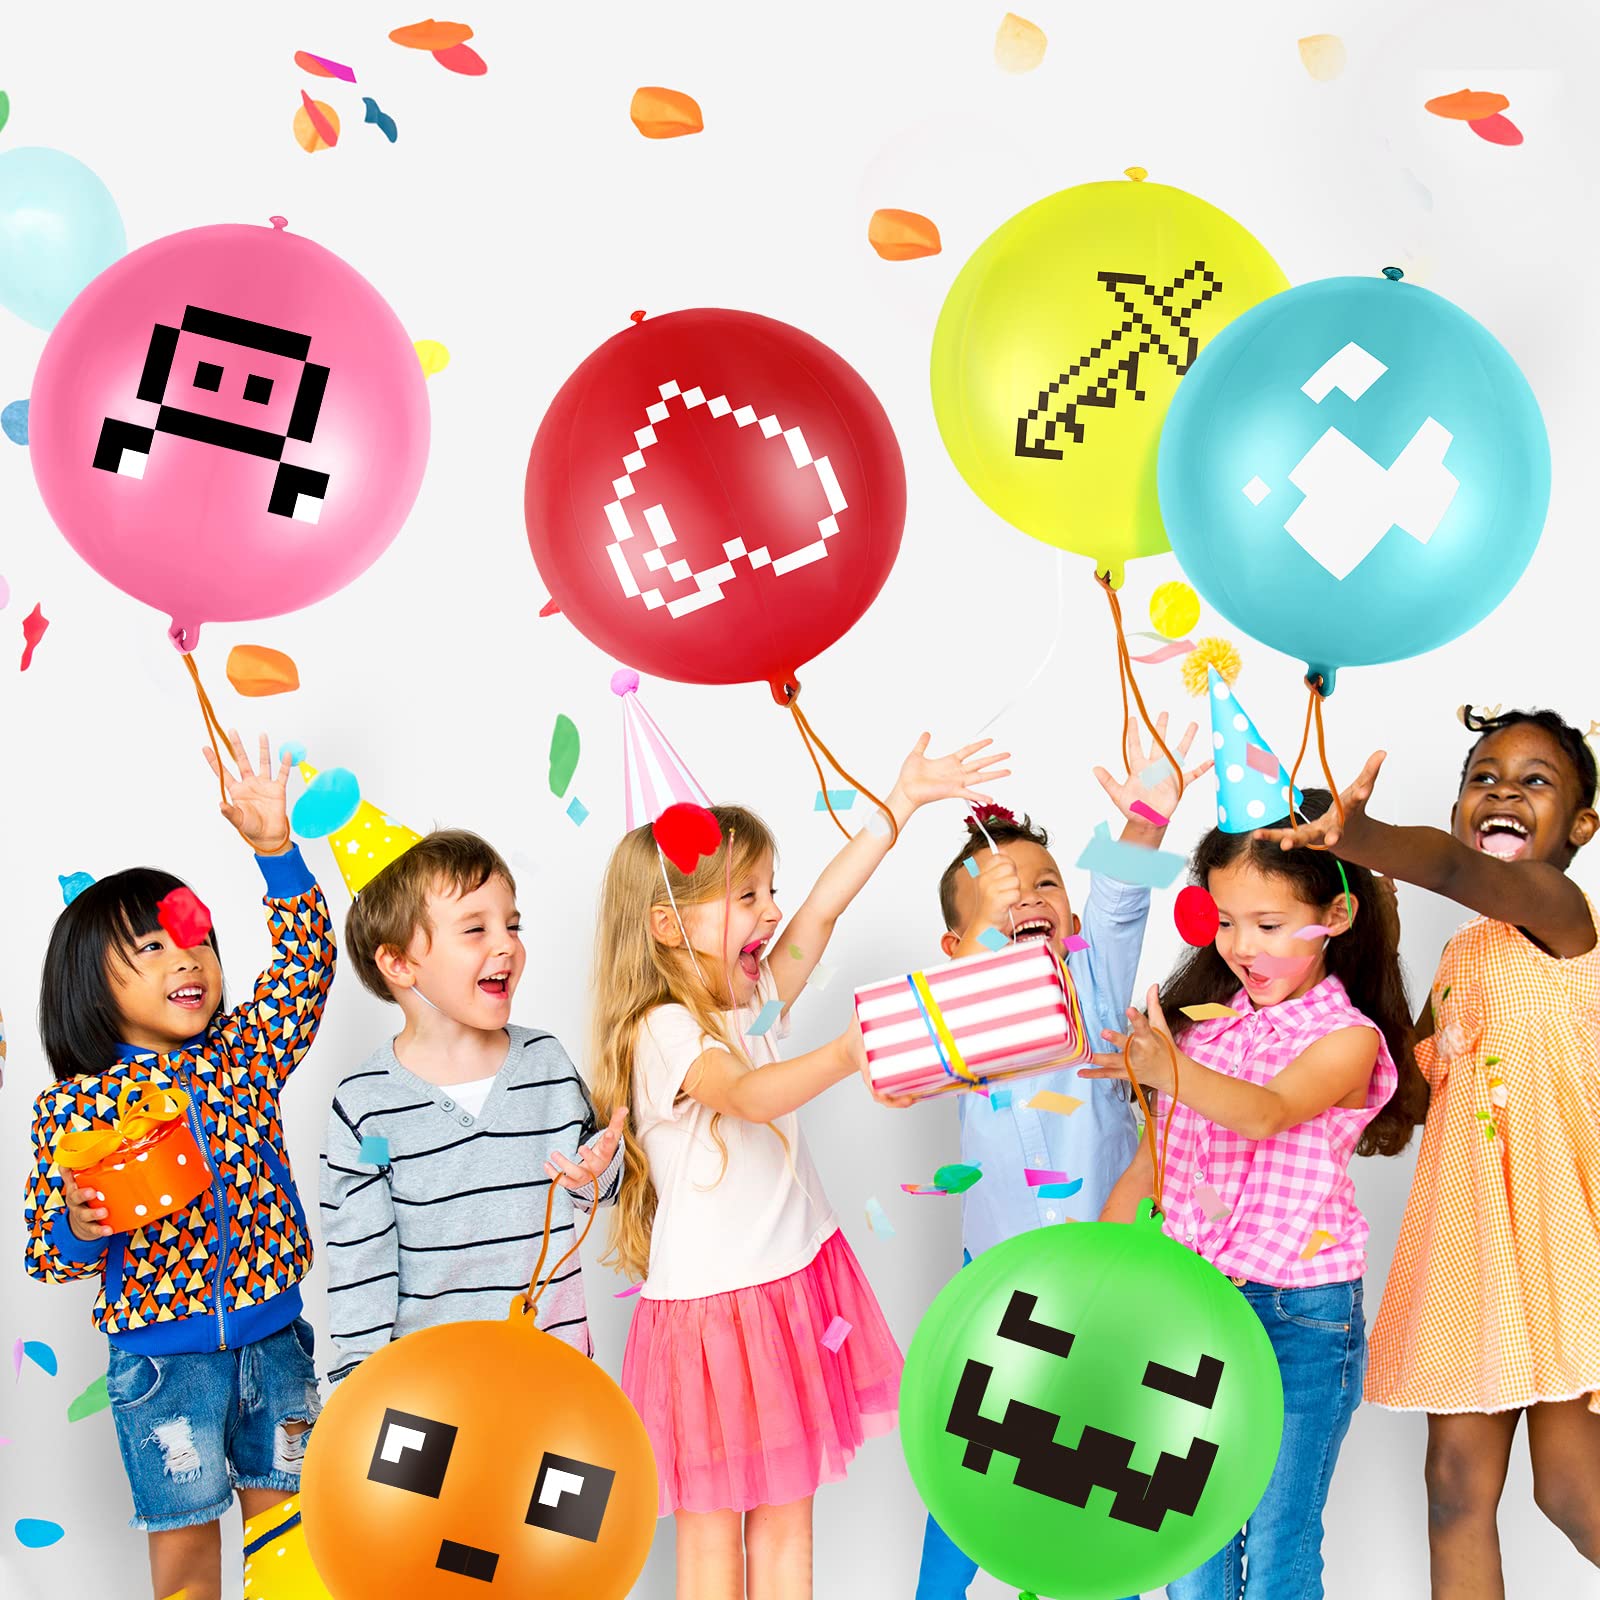 30 Pcs Pixelated Punch Balloons Colorful Latex Punch Ball Miner Video Game Party Favors Bounce Balloons with Rubber Band Handle for Birthday Party